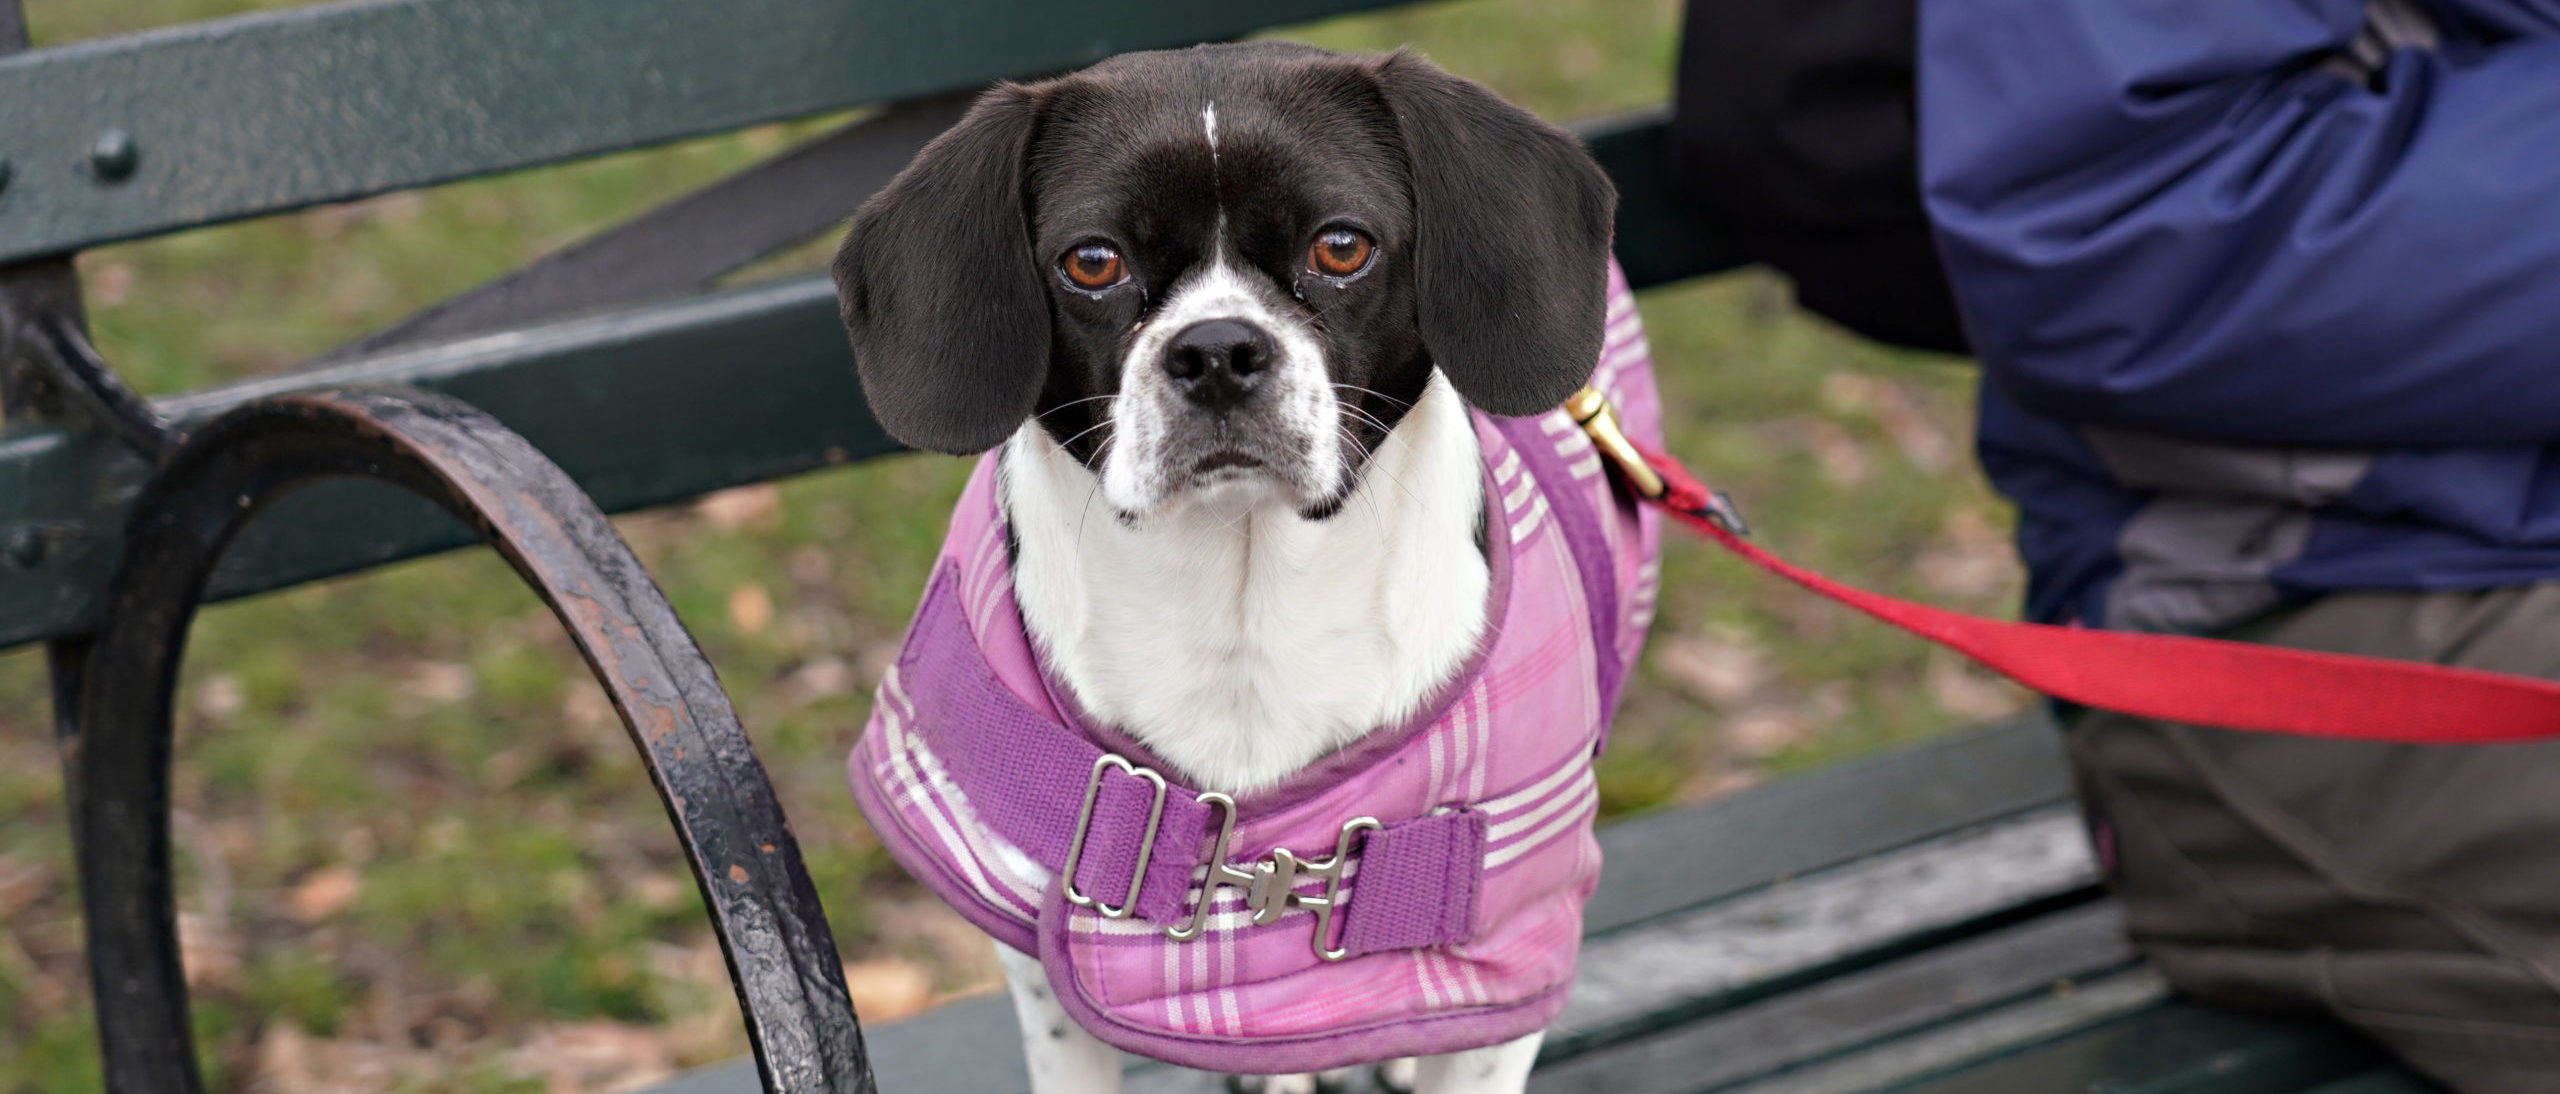 A Beagle/ Pekingese dog stands on a bench in Central Park, New York City, on March 17, 2020. (Photo by Cindy Ord/Getty Images)